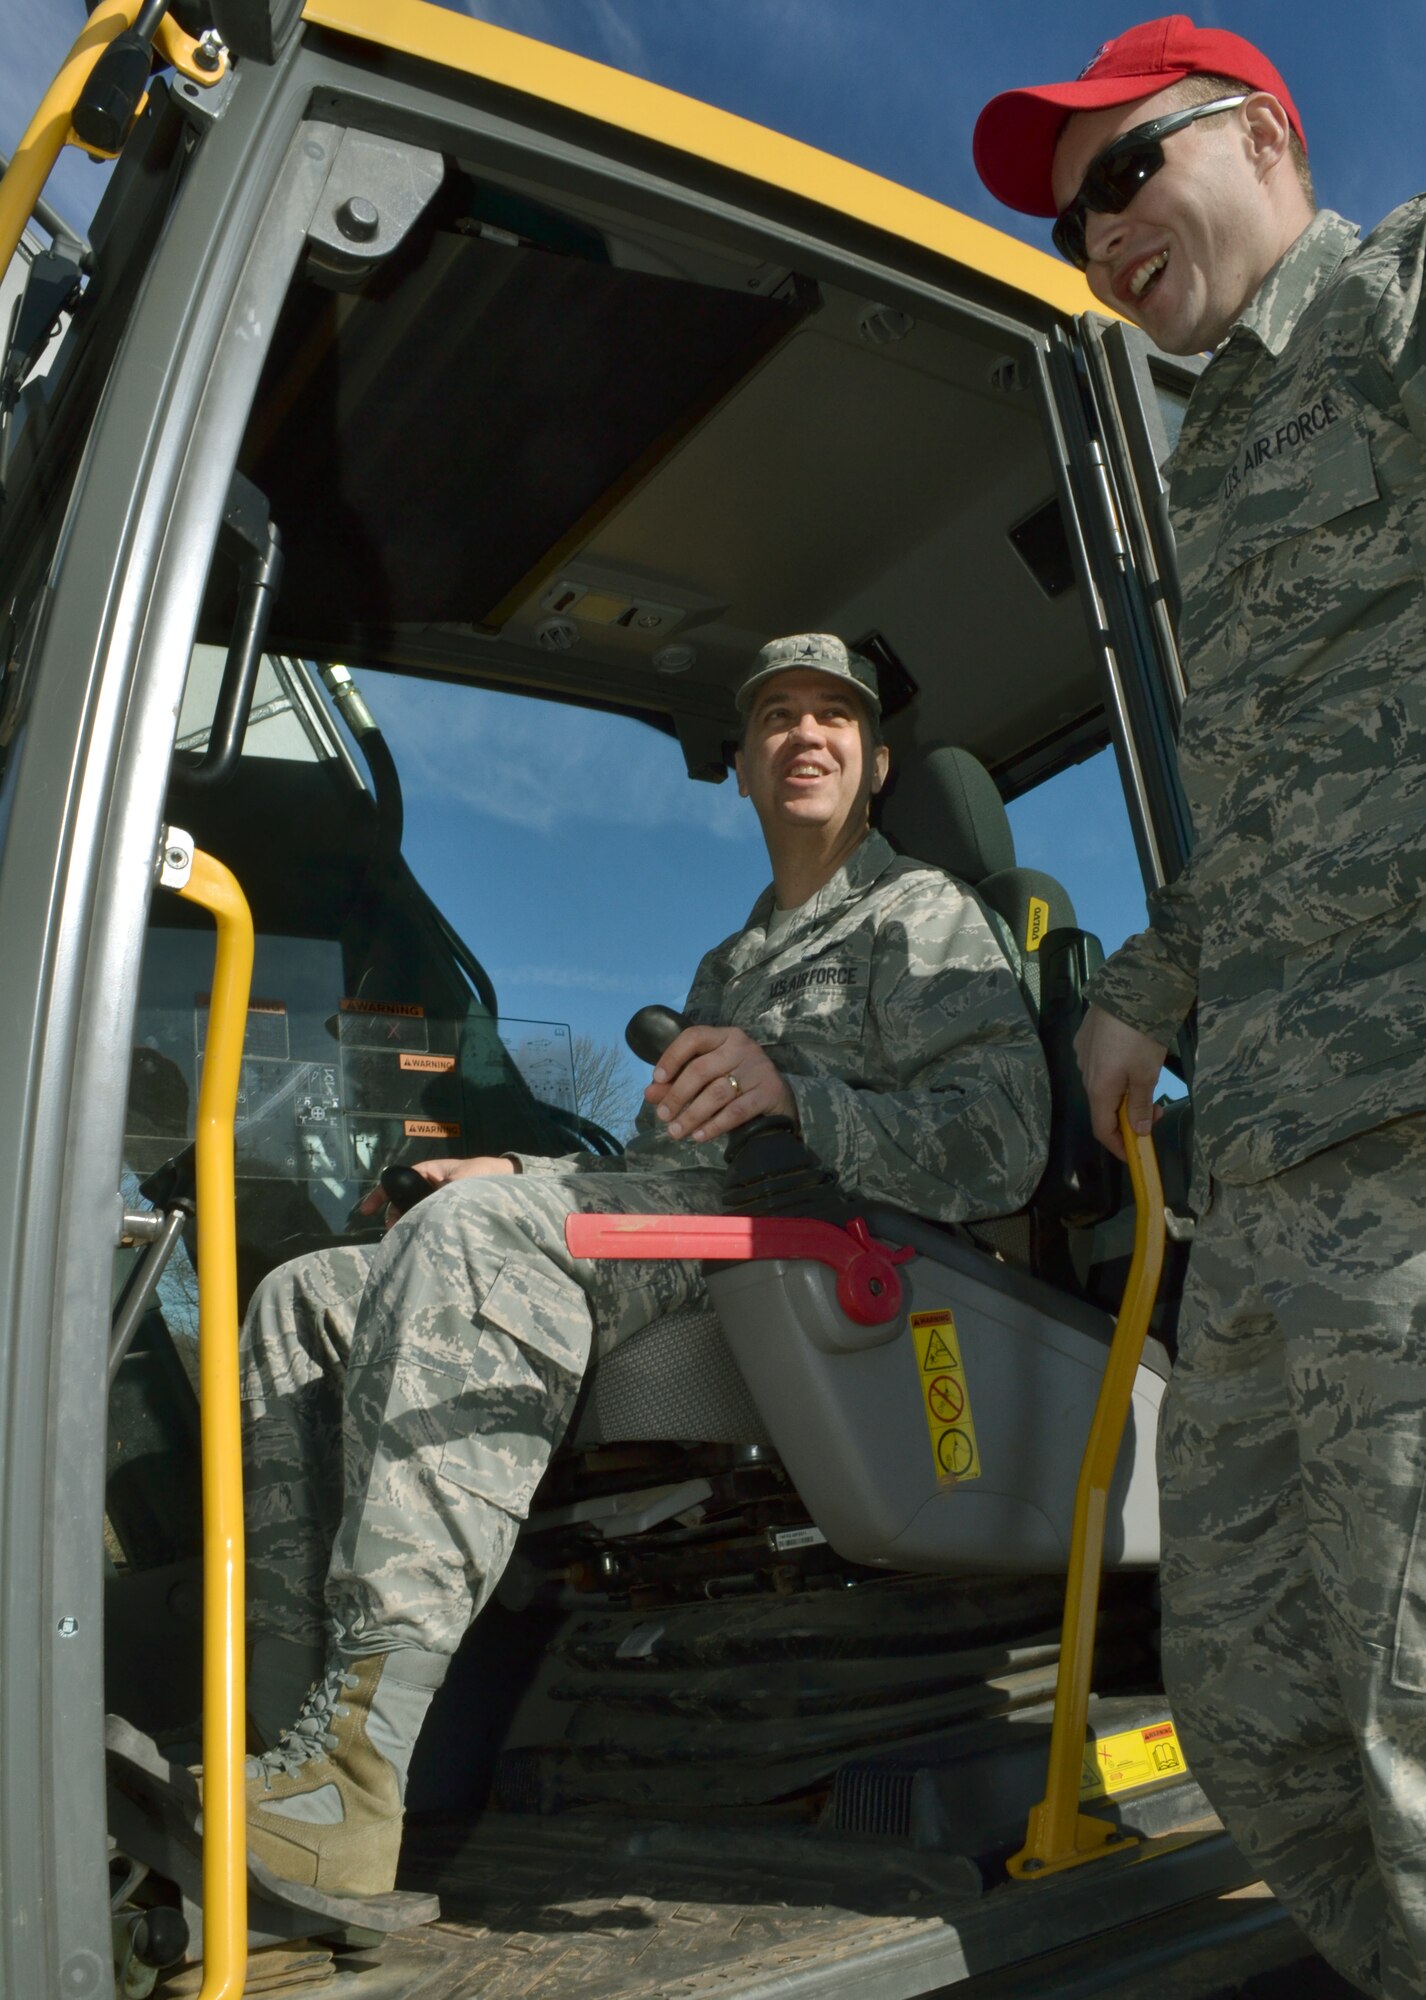 Brig. Gen. Michael R. Taheri, the Commander of the Air National Guard Readiness Center, Joint Base Andrews, Maryland, sits inside an excavator while Senior Airman Anthony Masser, of the 201st RED HORSE, Det. 1, explains the controls in a training area at Horsham Air Guard Station, Pa., March 12, 2016. Taheri received a hands-on tour throughout the installation, seeing and experiencing the various career fields of members stationed here. (U.S. Air National Guard photo by Tech. Sgt. Andria Allmond)